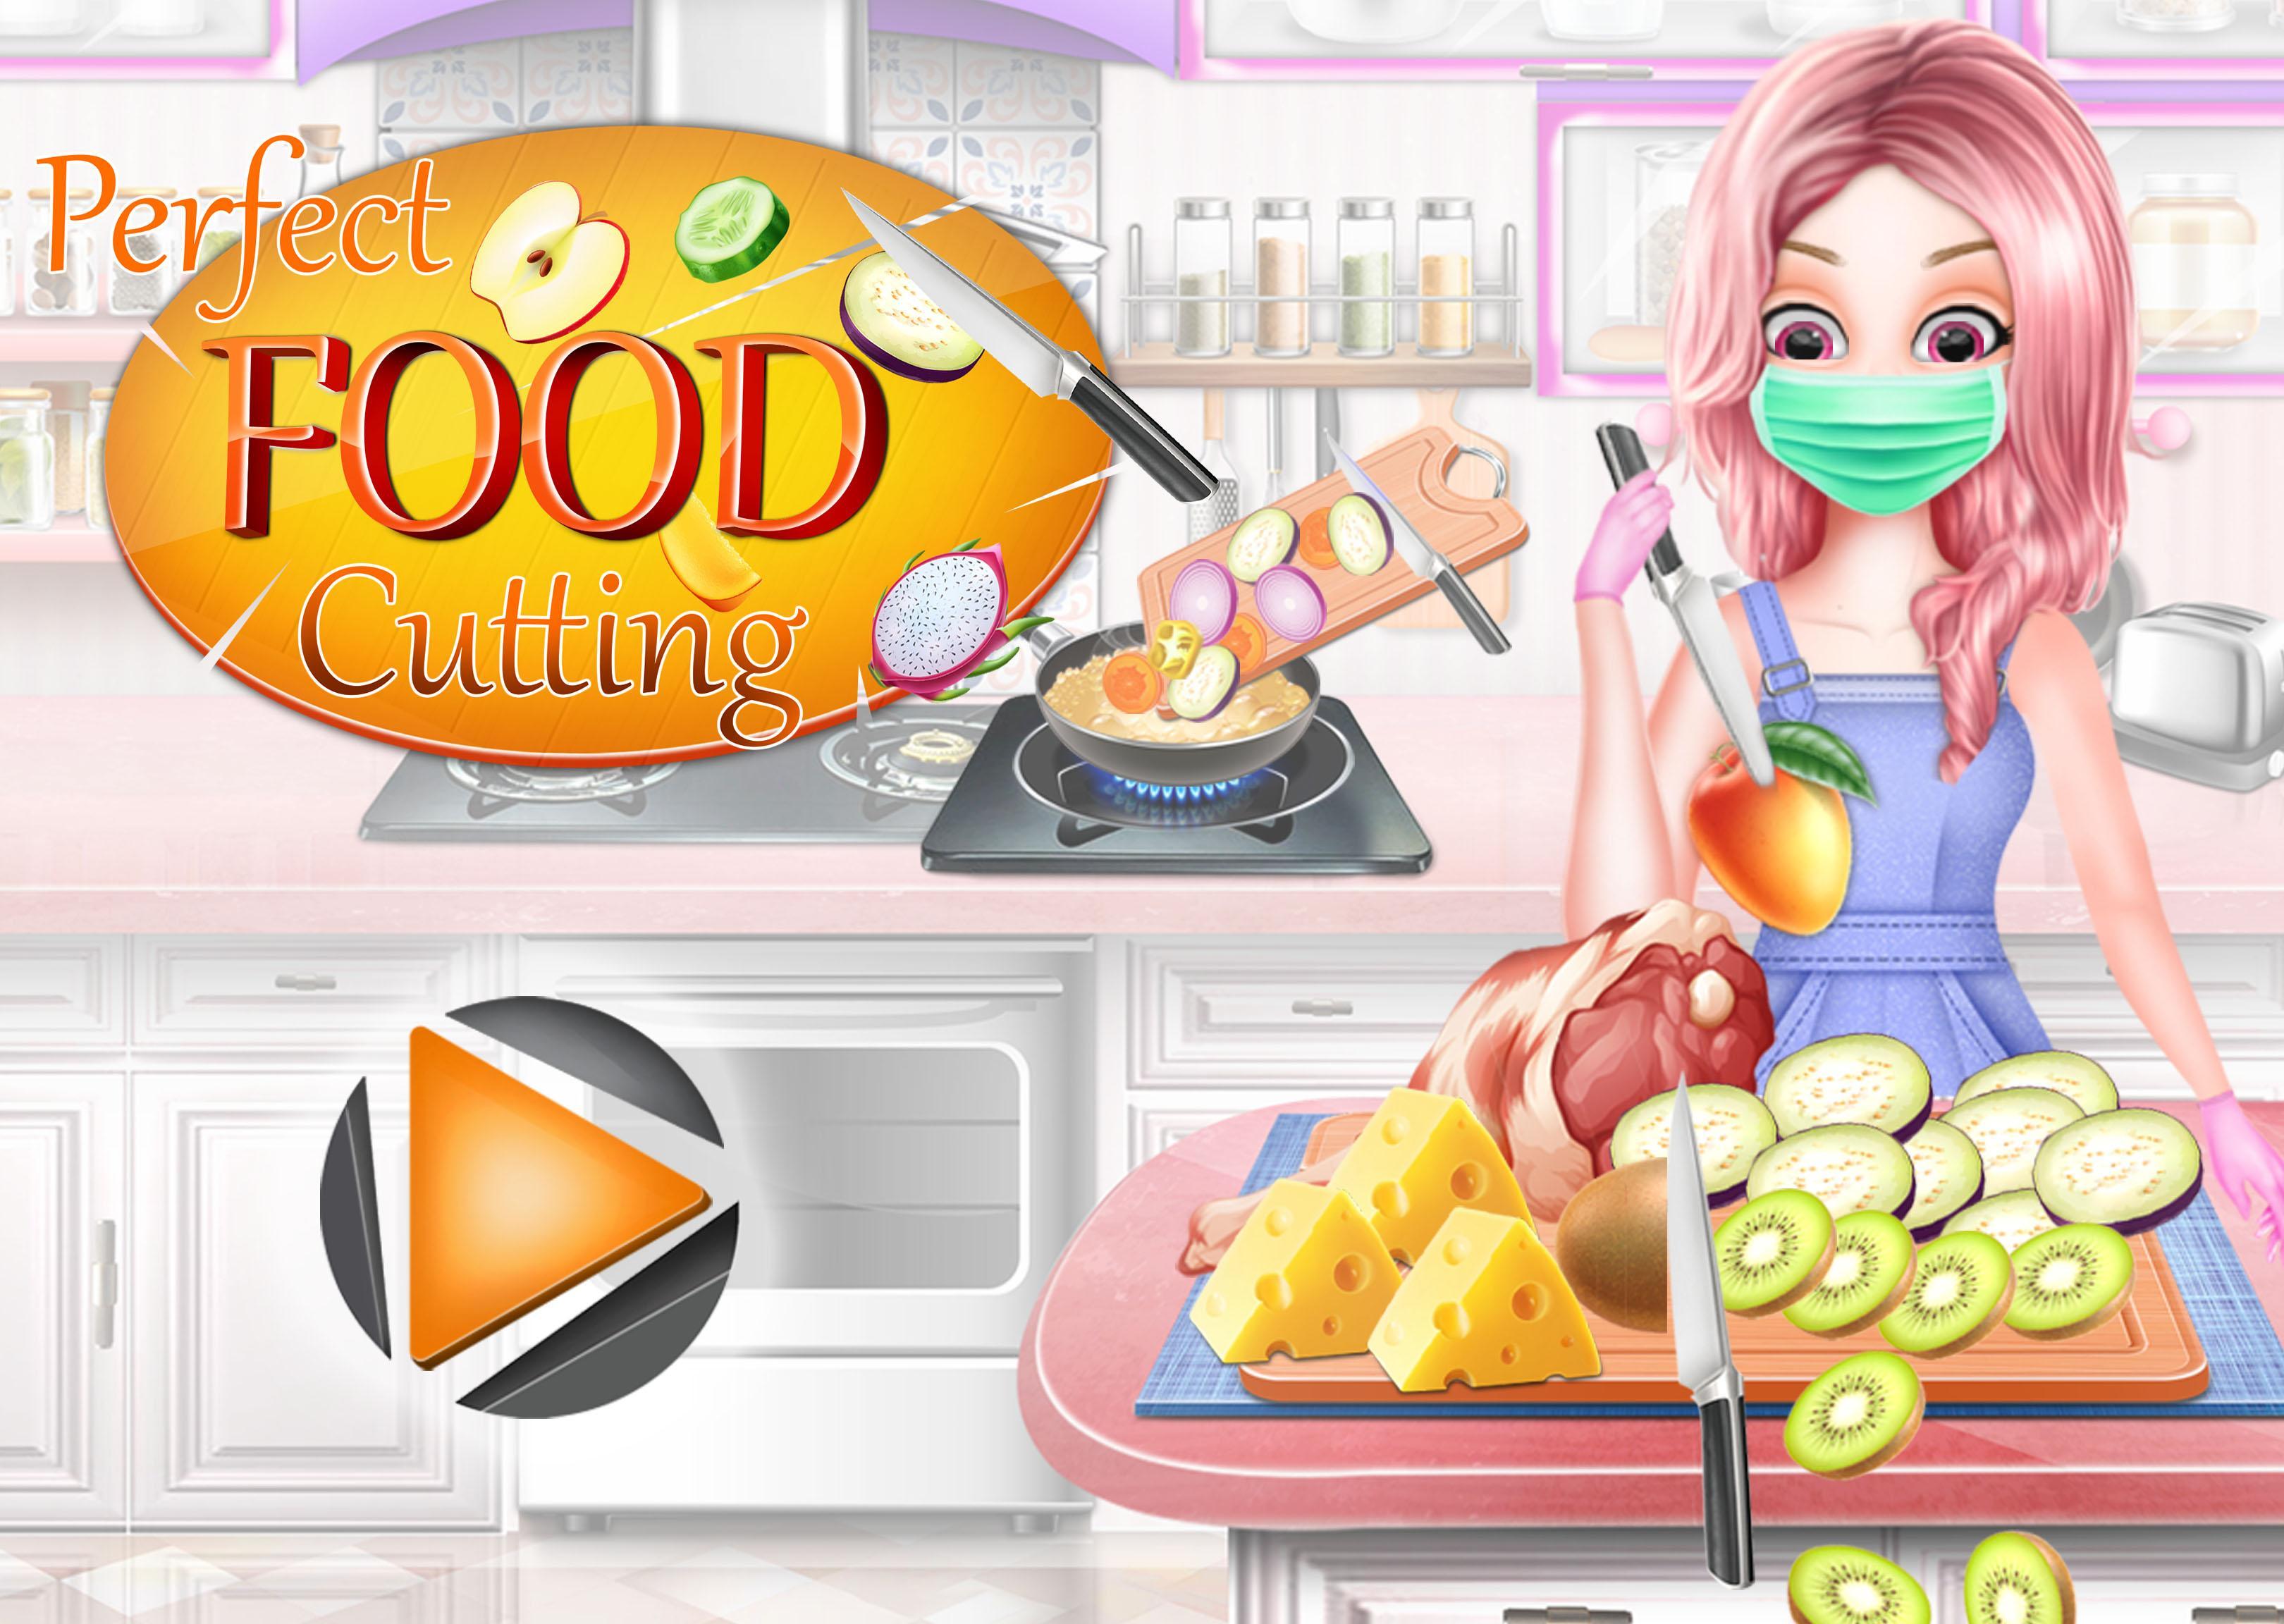 Cut Perfect Food Slices & Cook - The Cooking Game الملصق